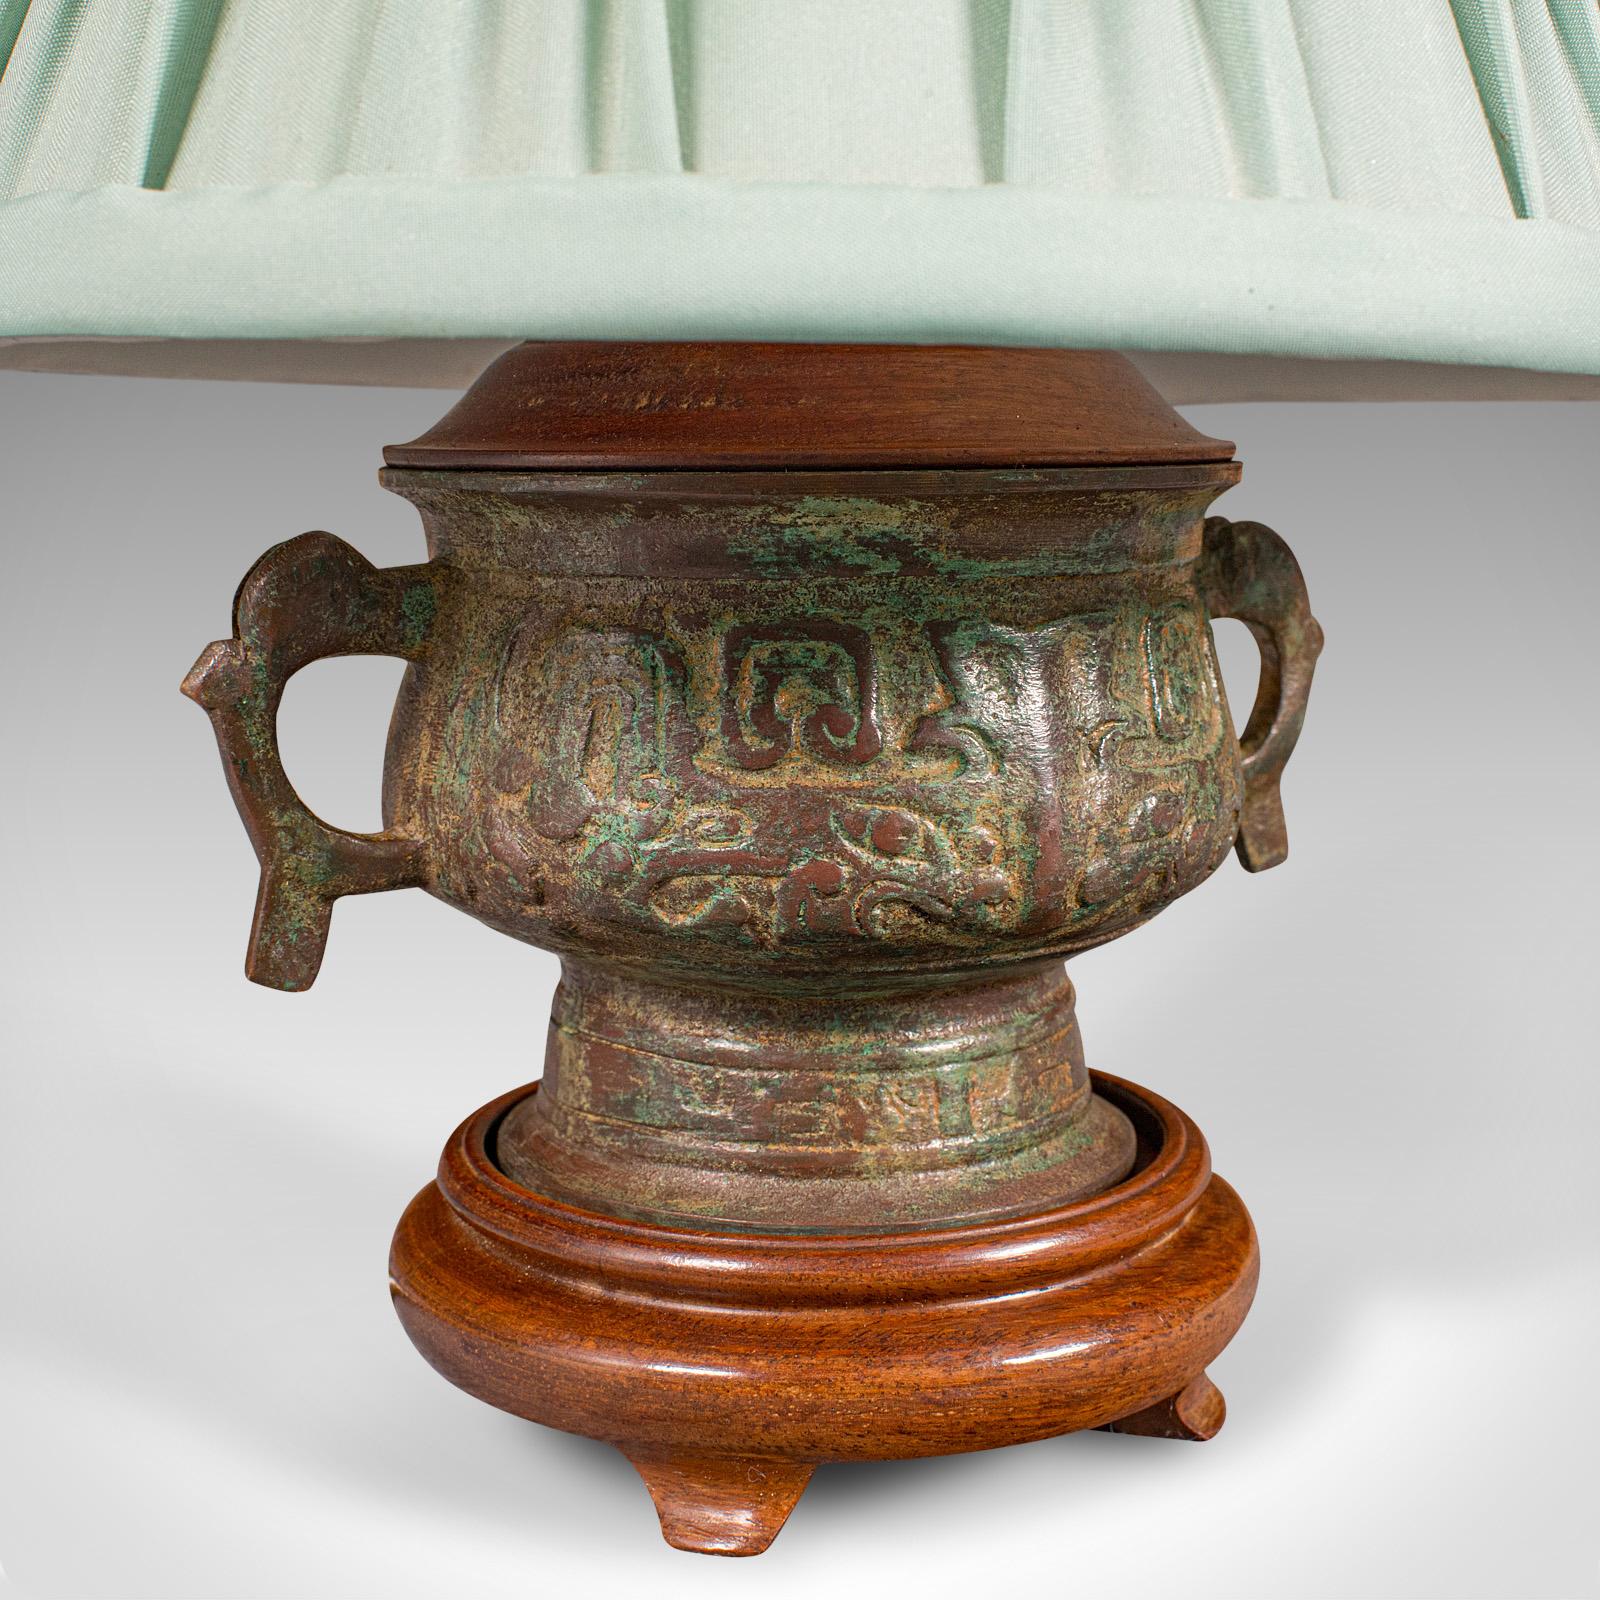 Small Vintage Side Lamp, Chinese, Bronze, Desk, Table Light, Decor, Circa 1970 For Sale 3